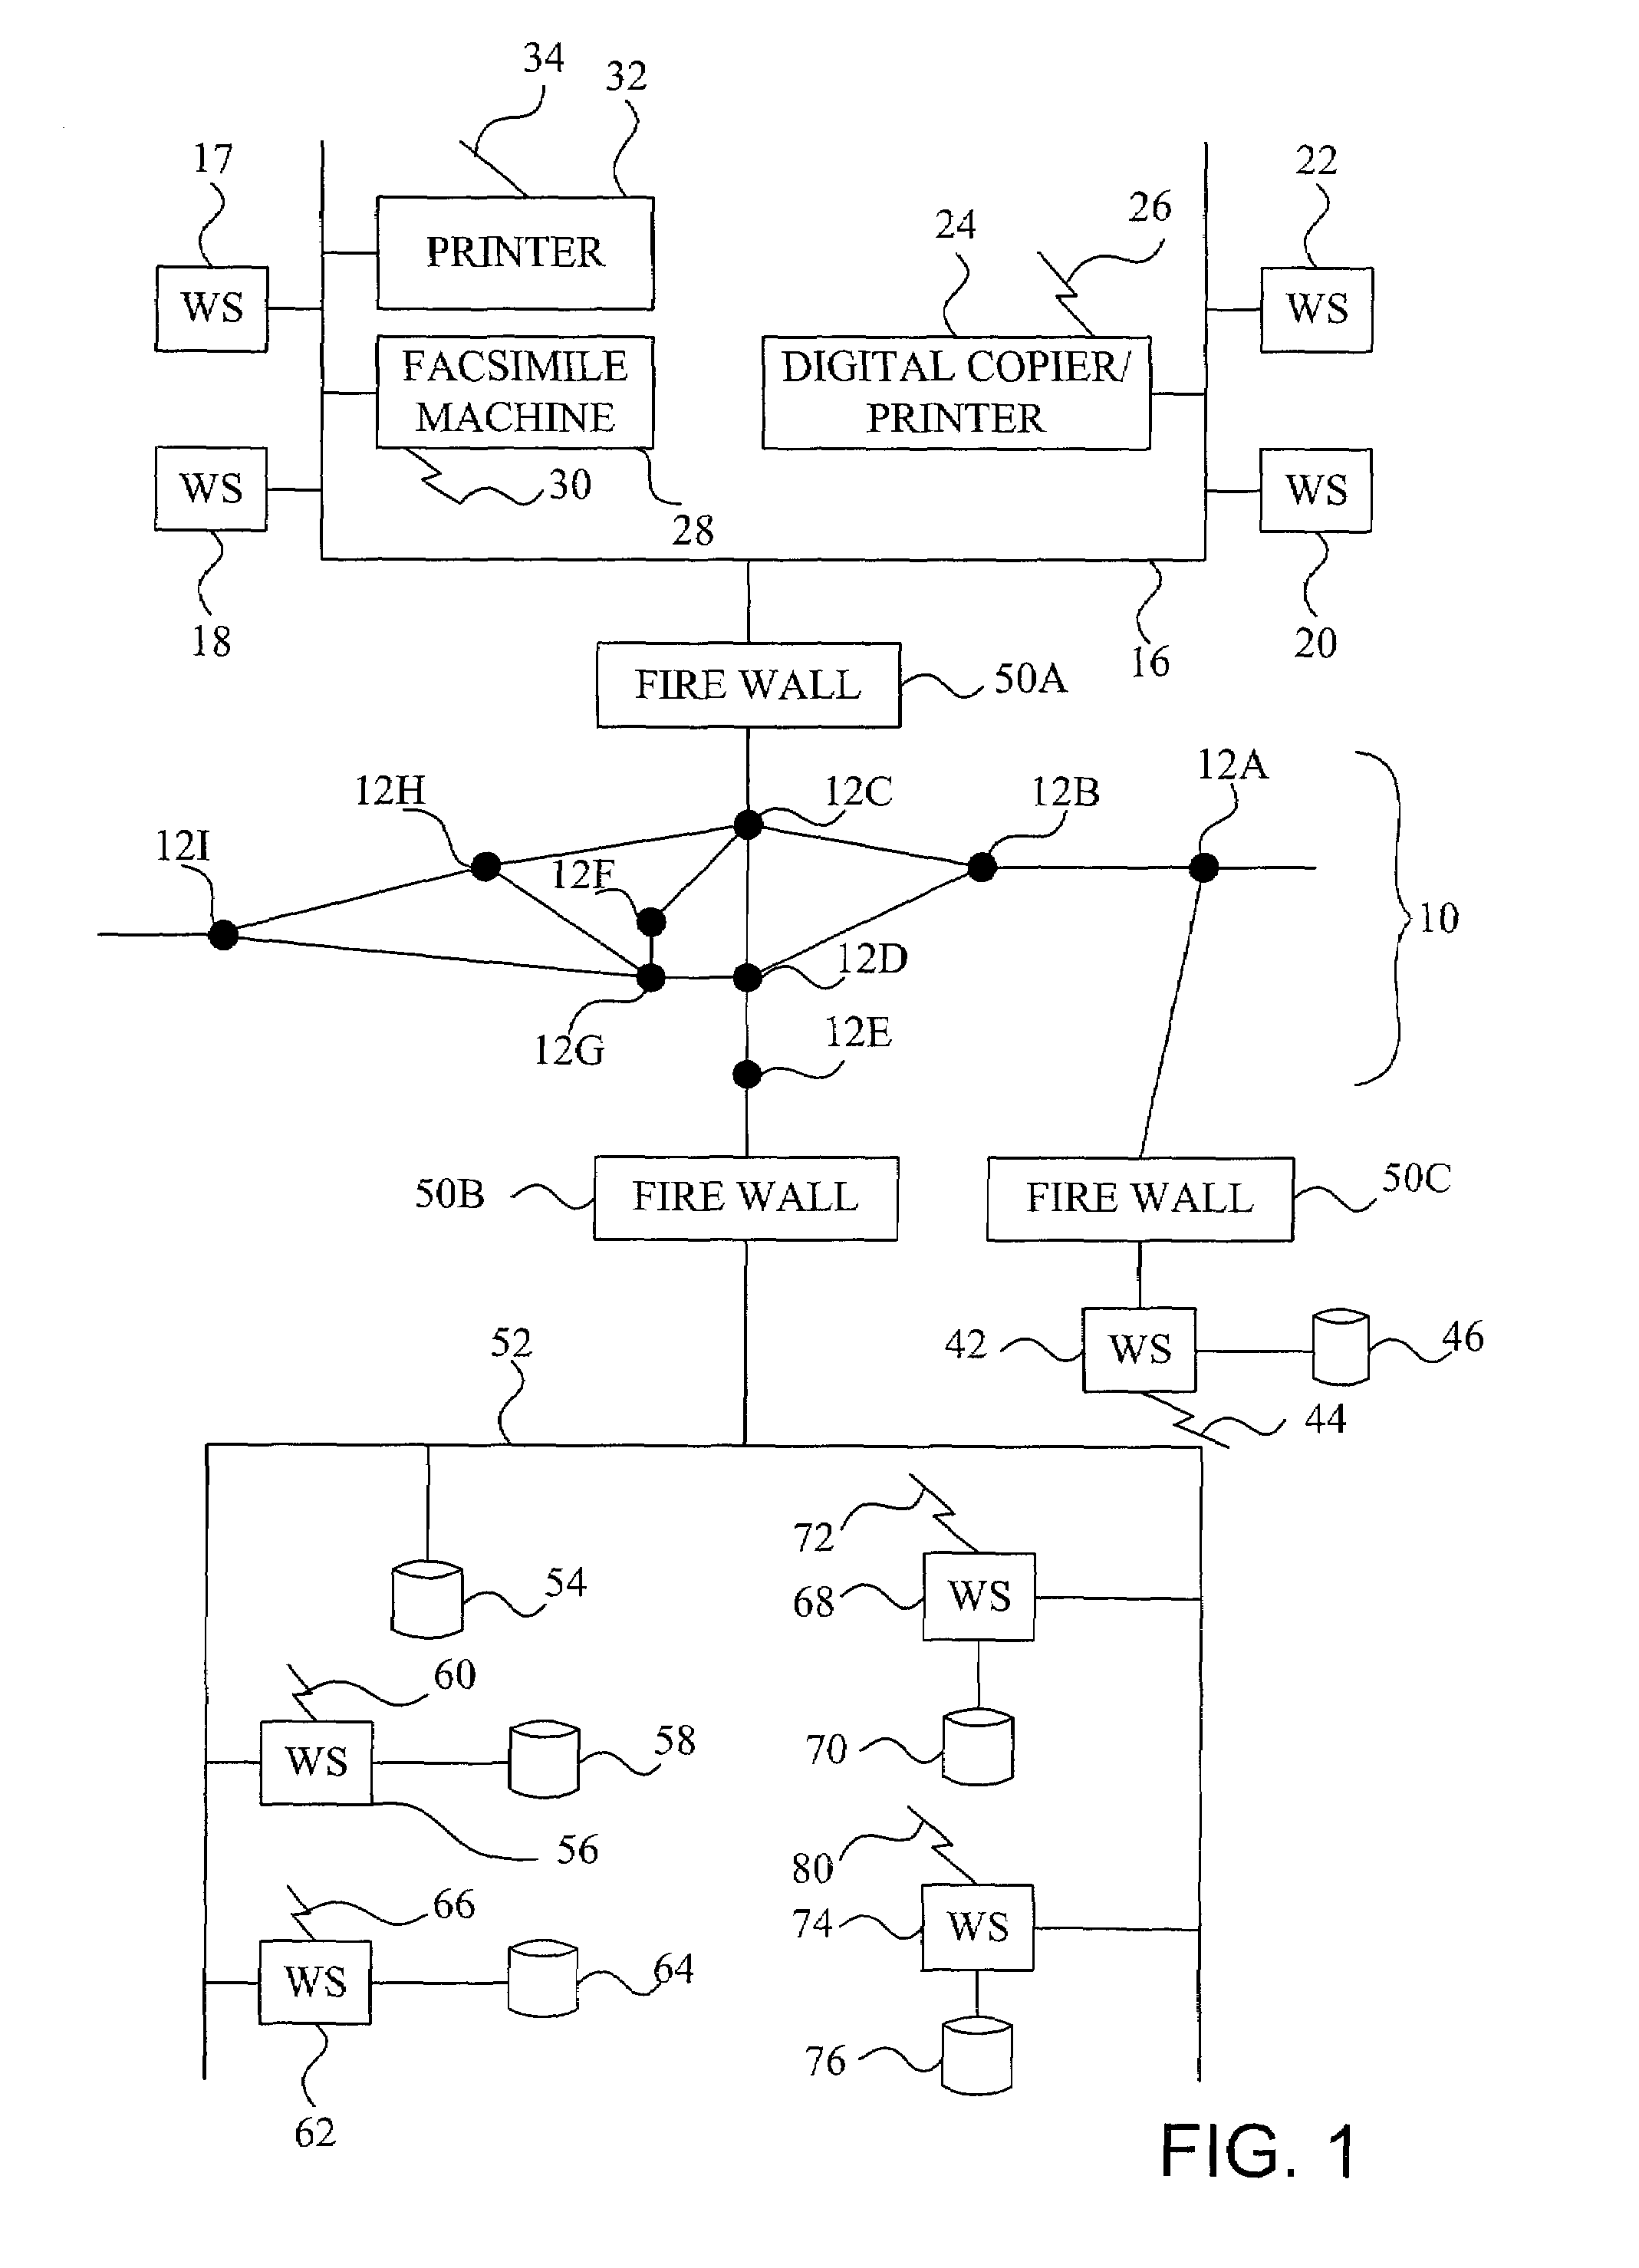 Method and system of remote diagnostic, control and information collection using multiple formats and multiple protocols with verification of formats and protocols